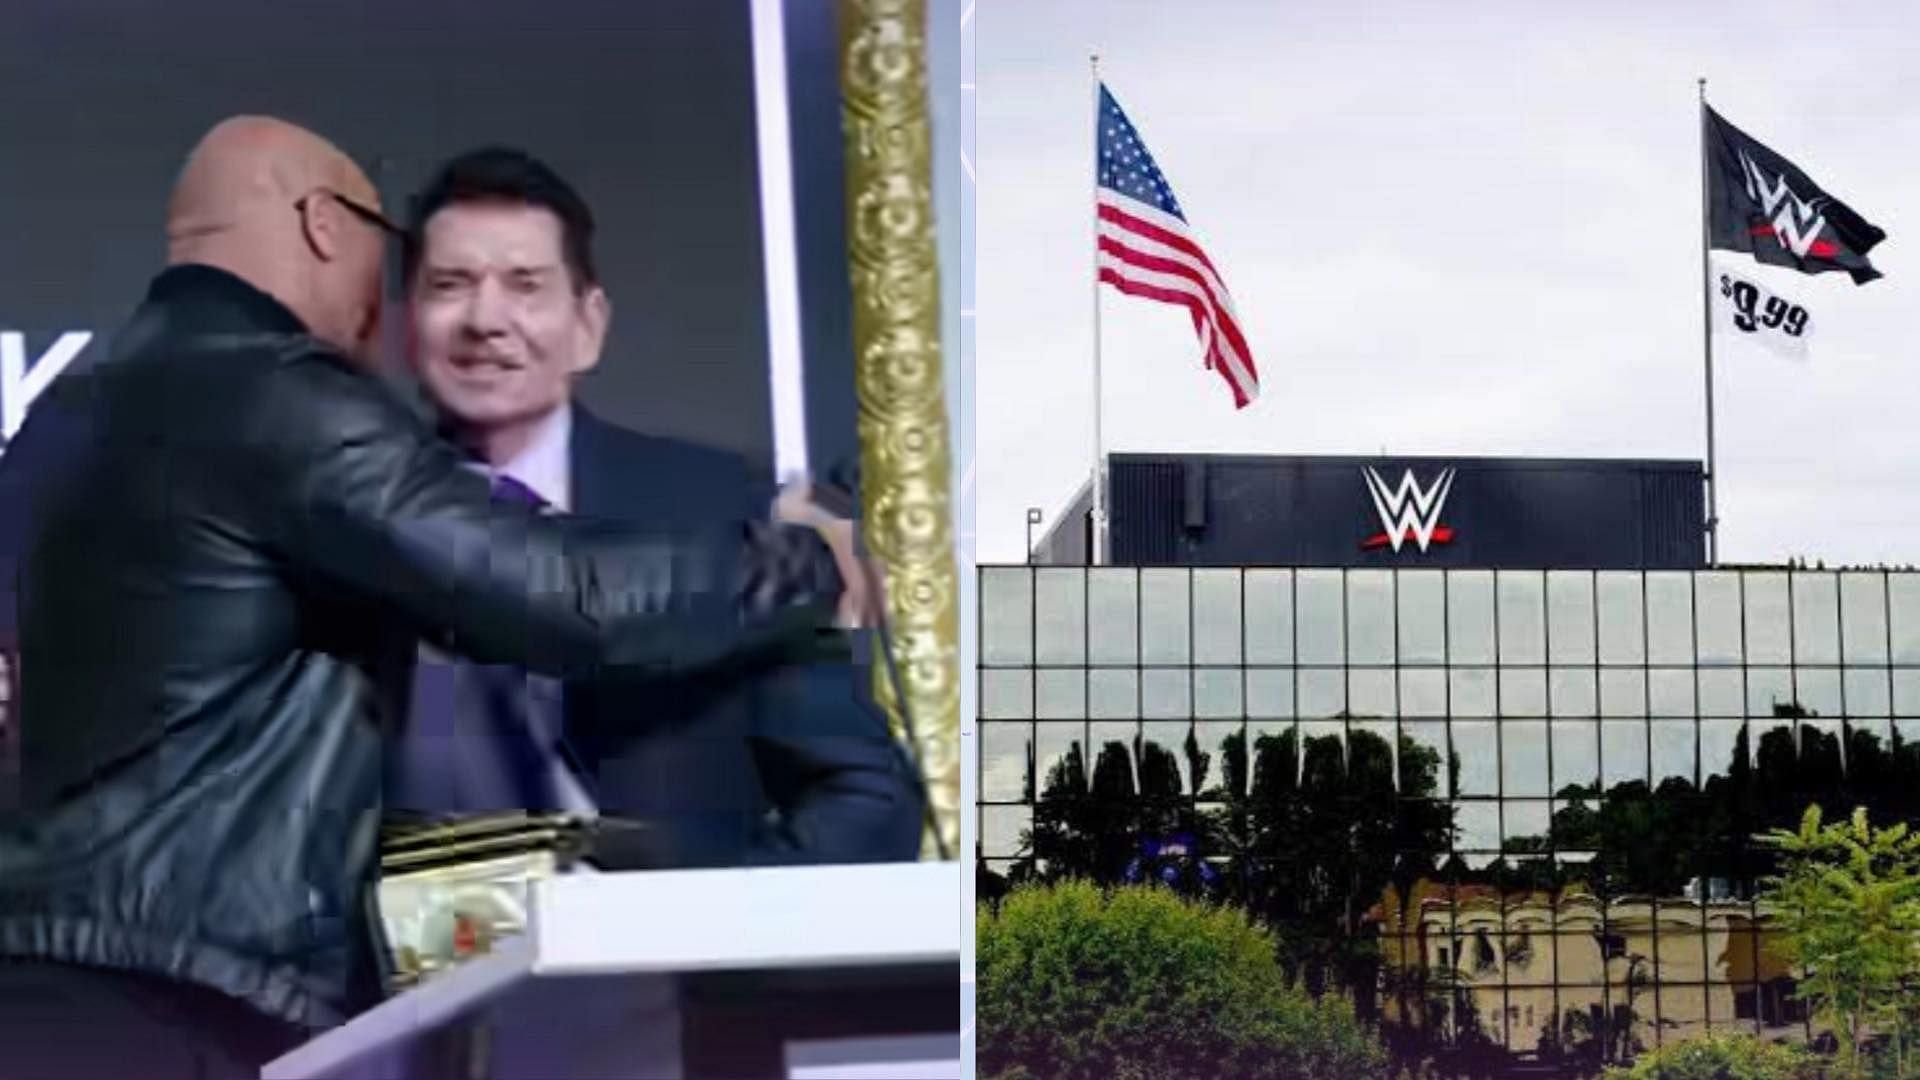 Vince McMahon is the former Chairman of WWE [Image credits: TKO